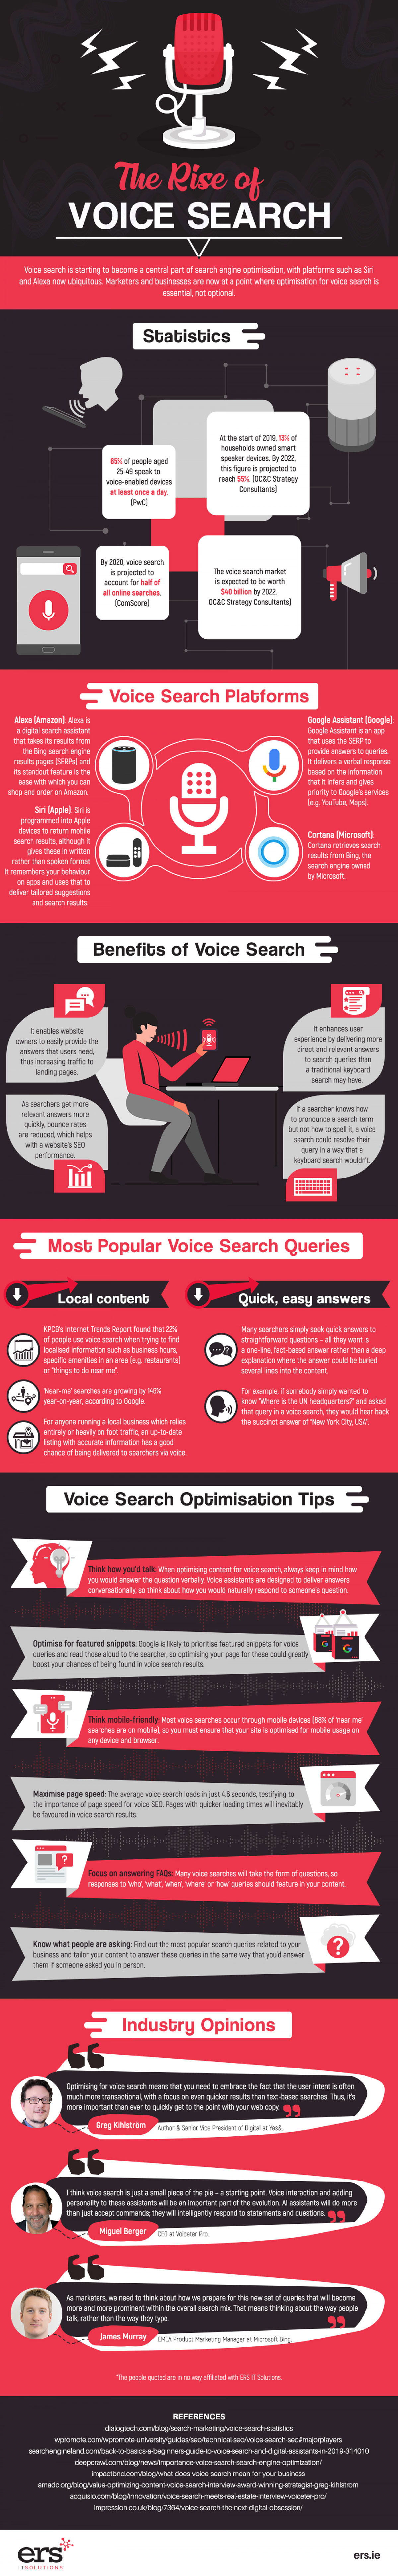  voice search